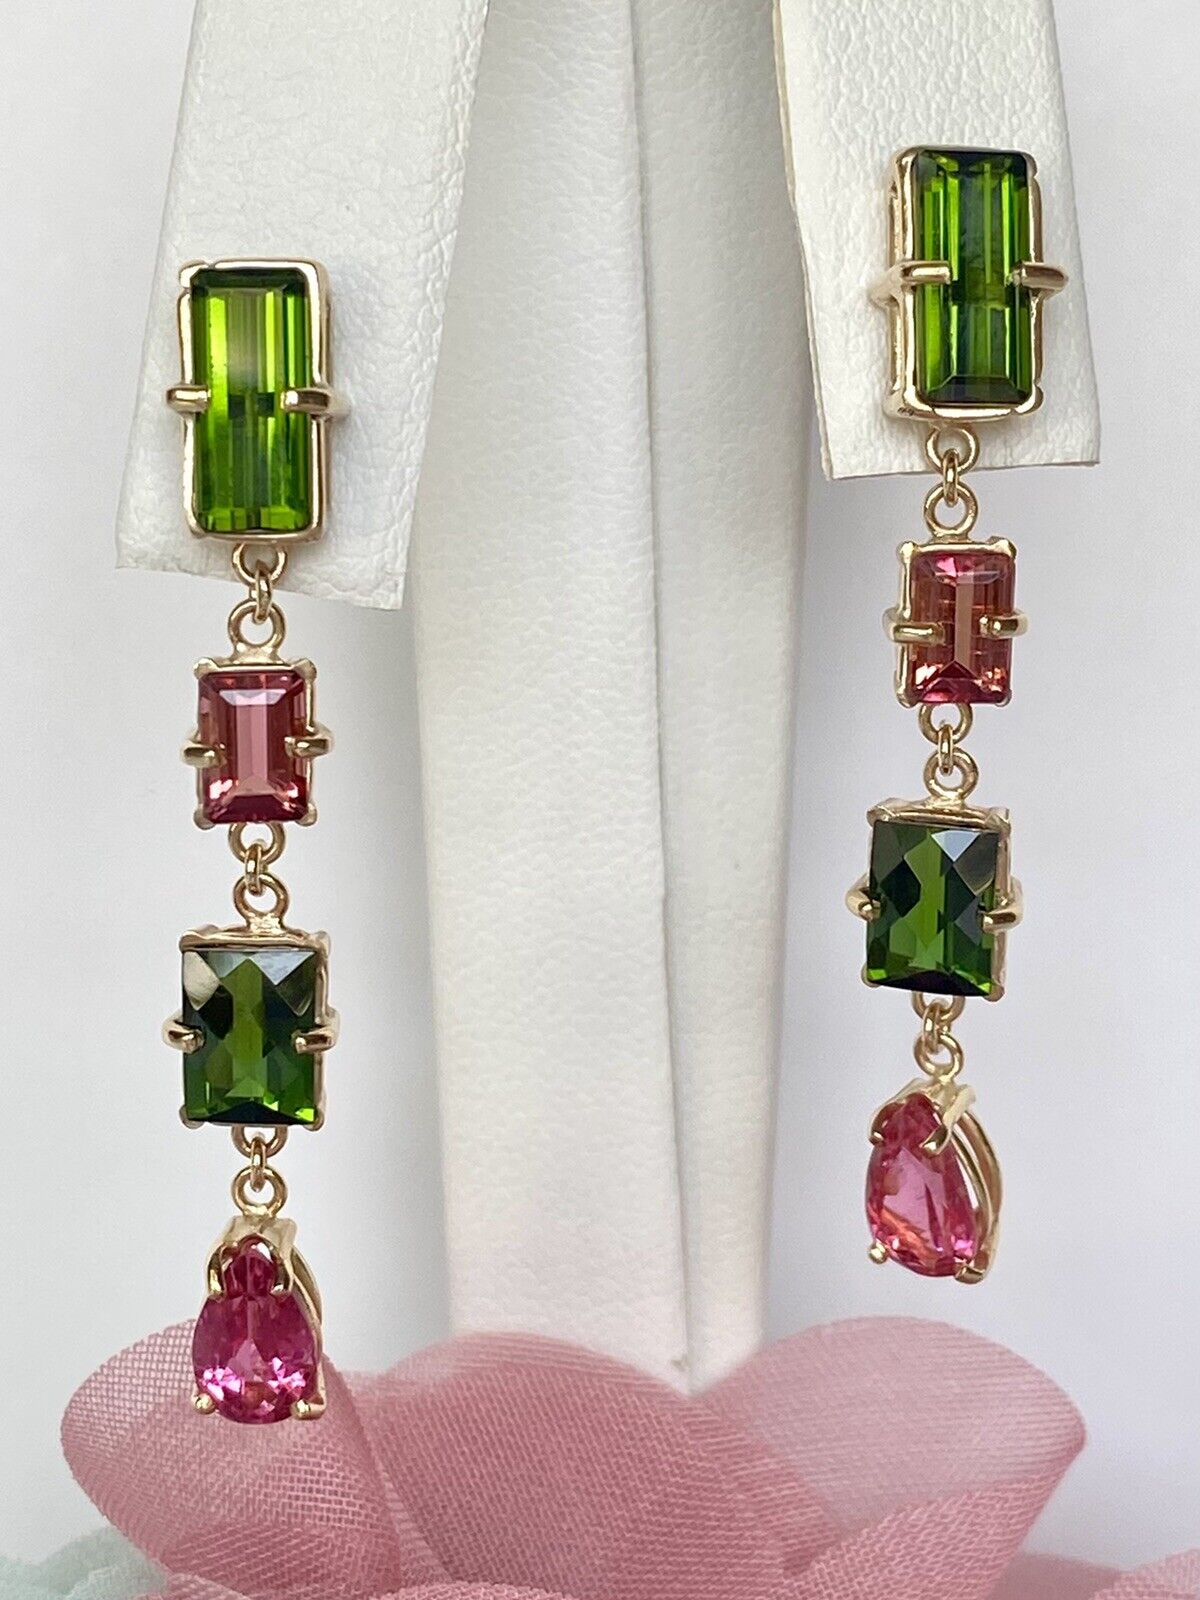 Top-Quality Genuine Tourmaline & Solid 14K Yellow Gold Dangle/Drop Earrings, New